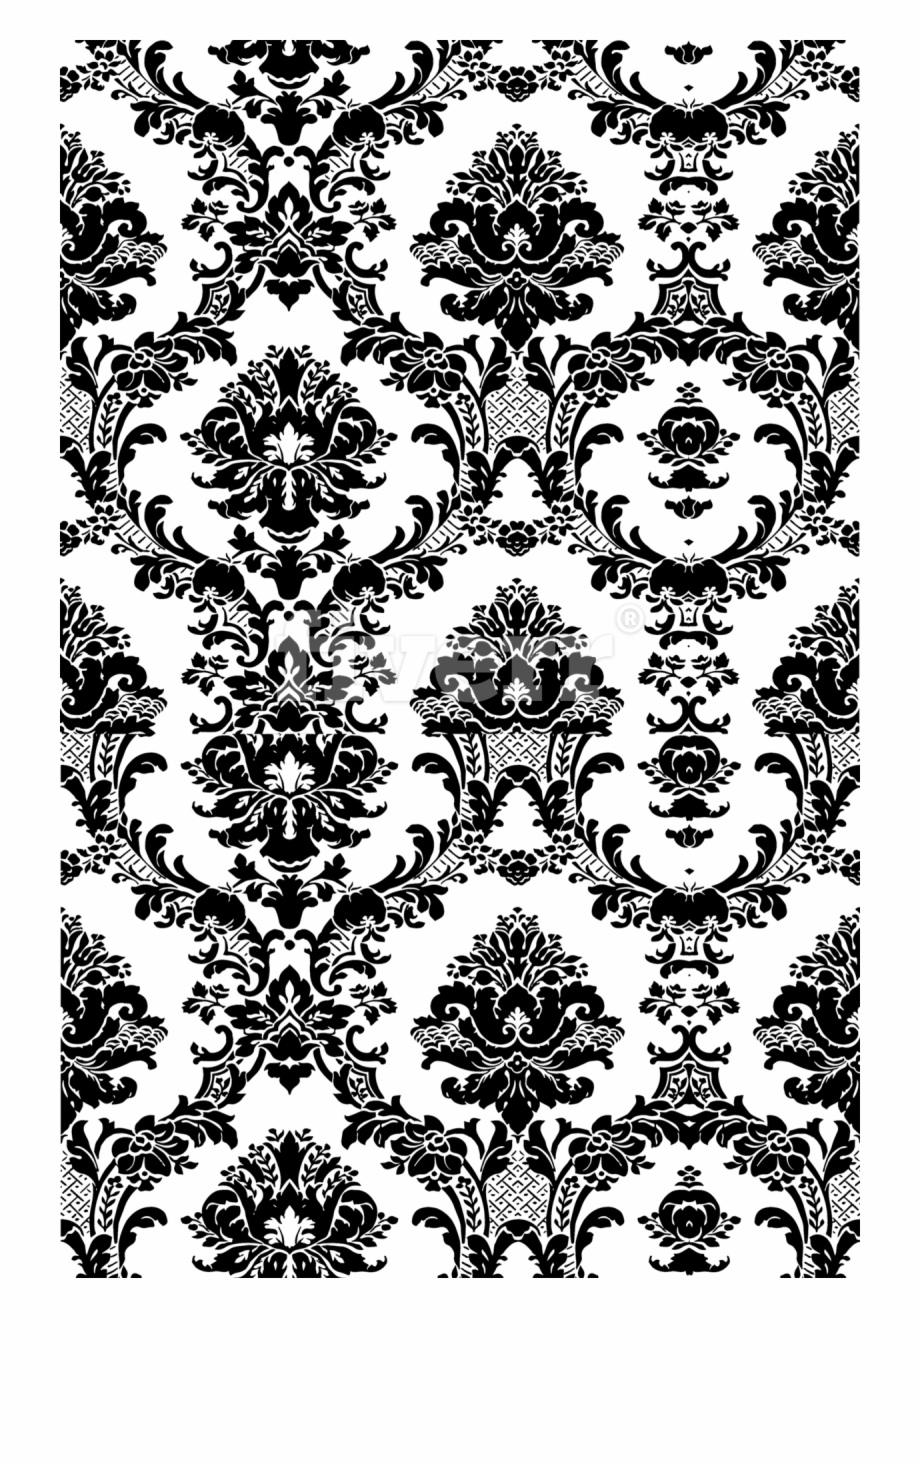 Big Worksample Image Black And White Victorian Pattern